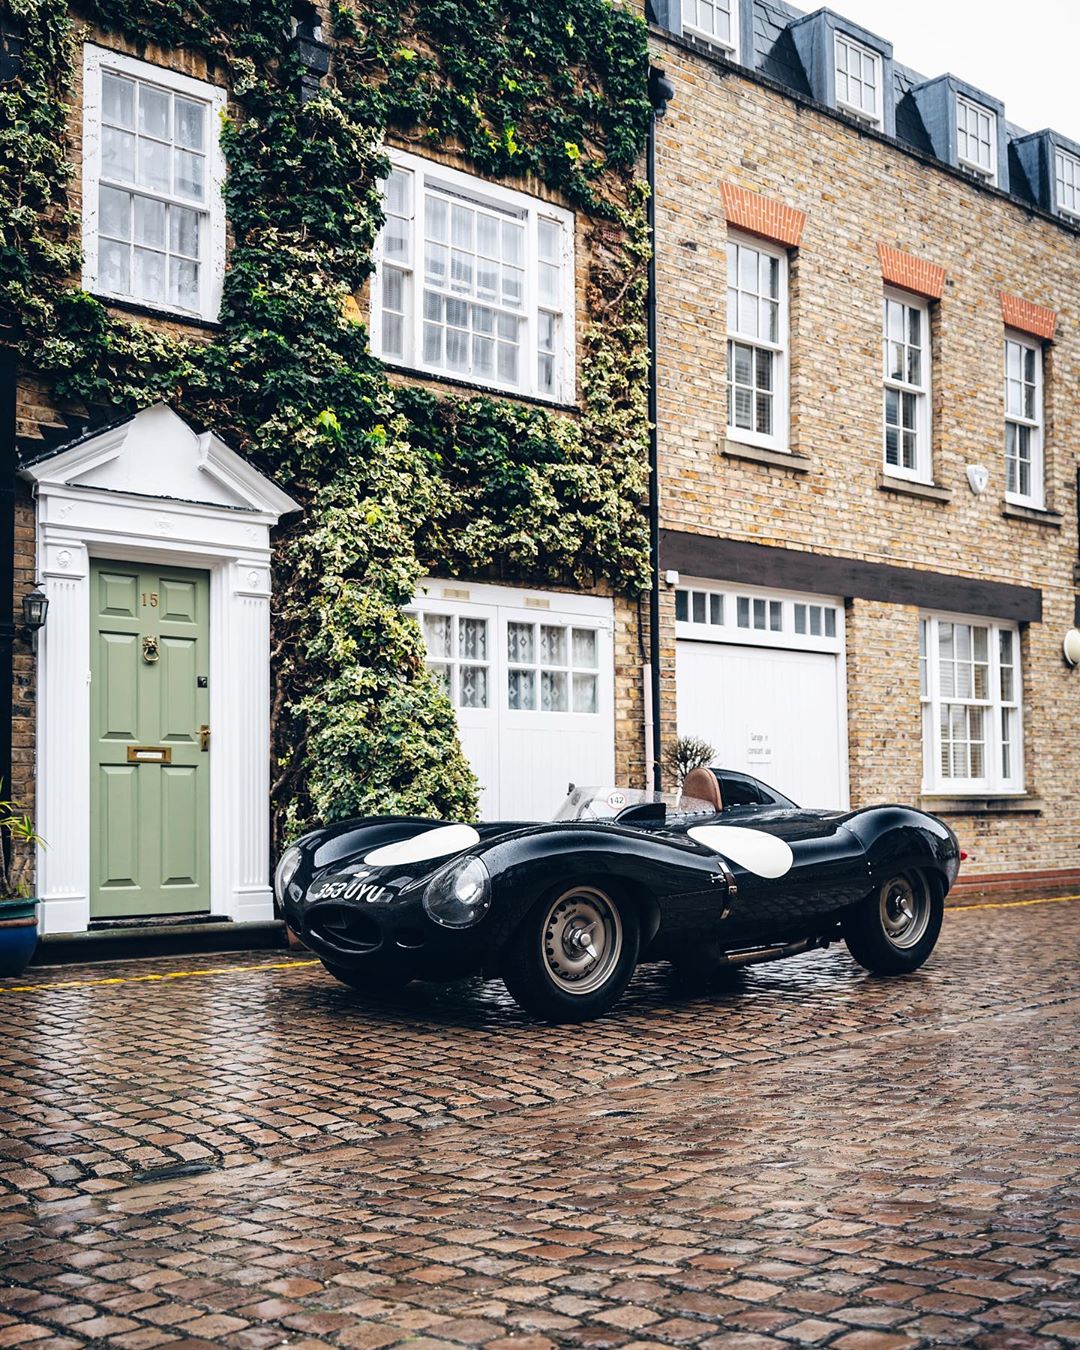 Real Jaguar D-Type on the Streets of London!